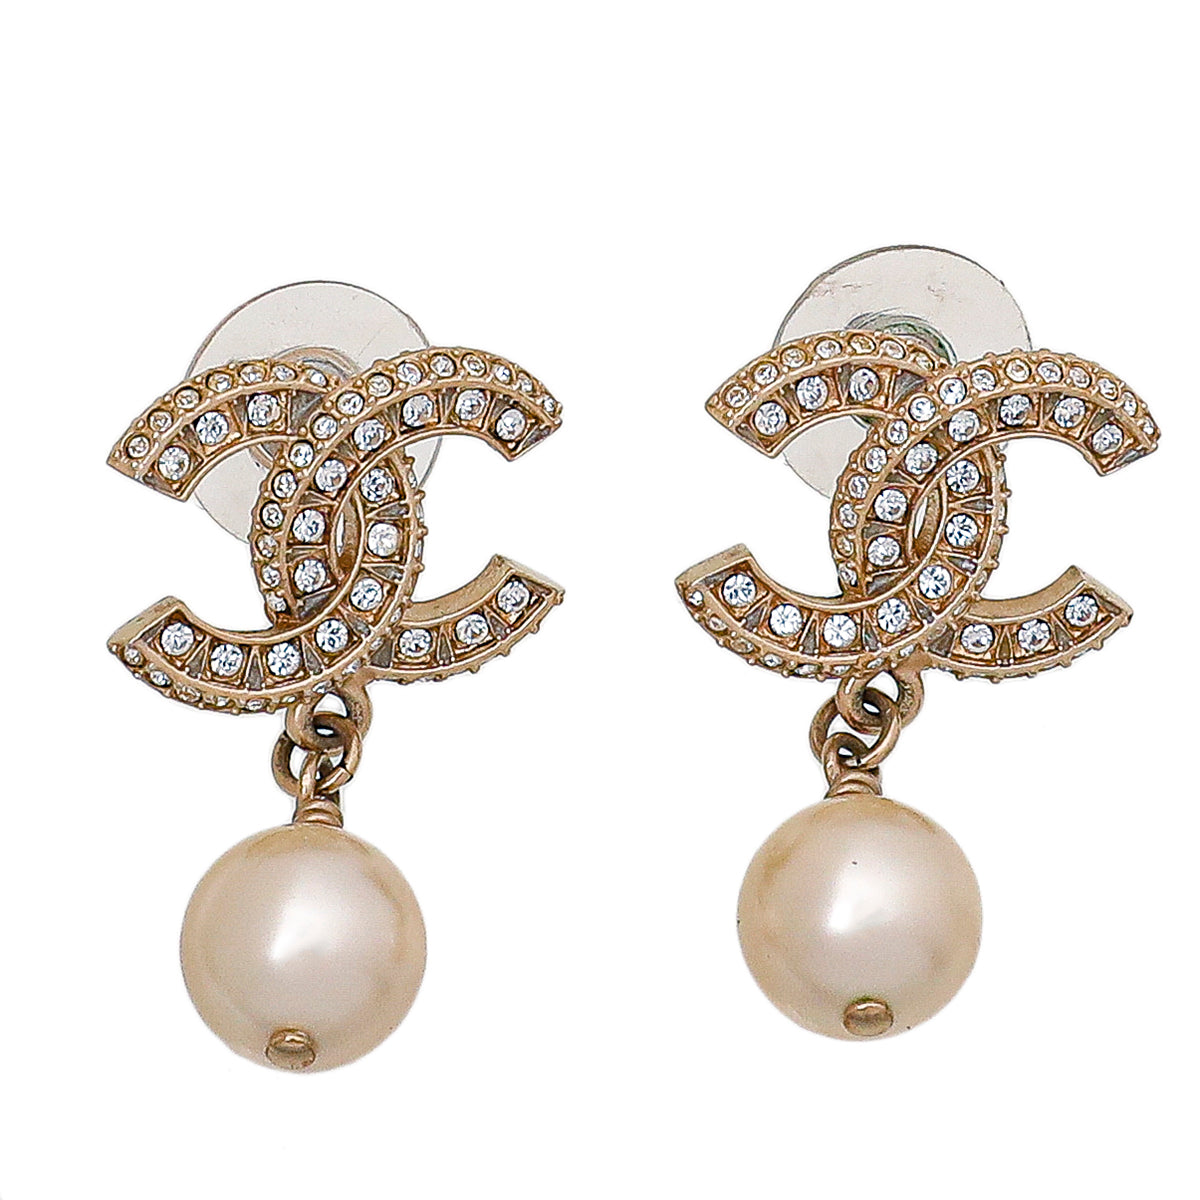 Auth CHANEL CC Logo Pearl Drop Clip On Earrings Gold Used from Japan FS   eBay